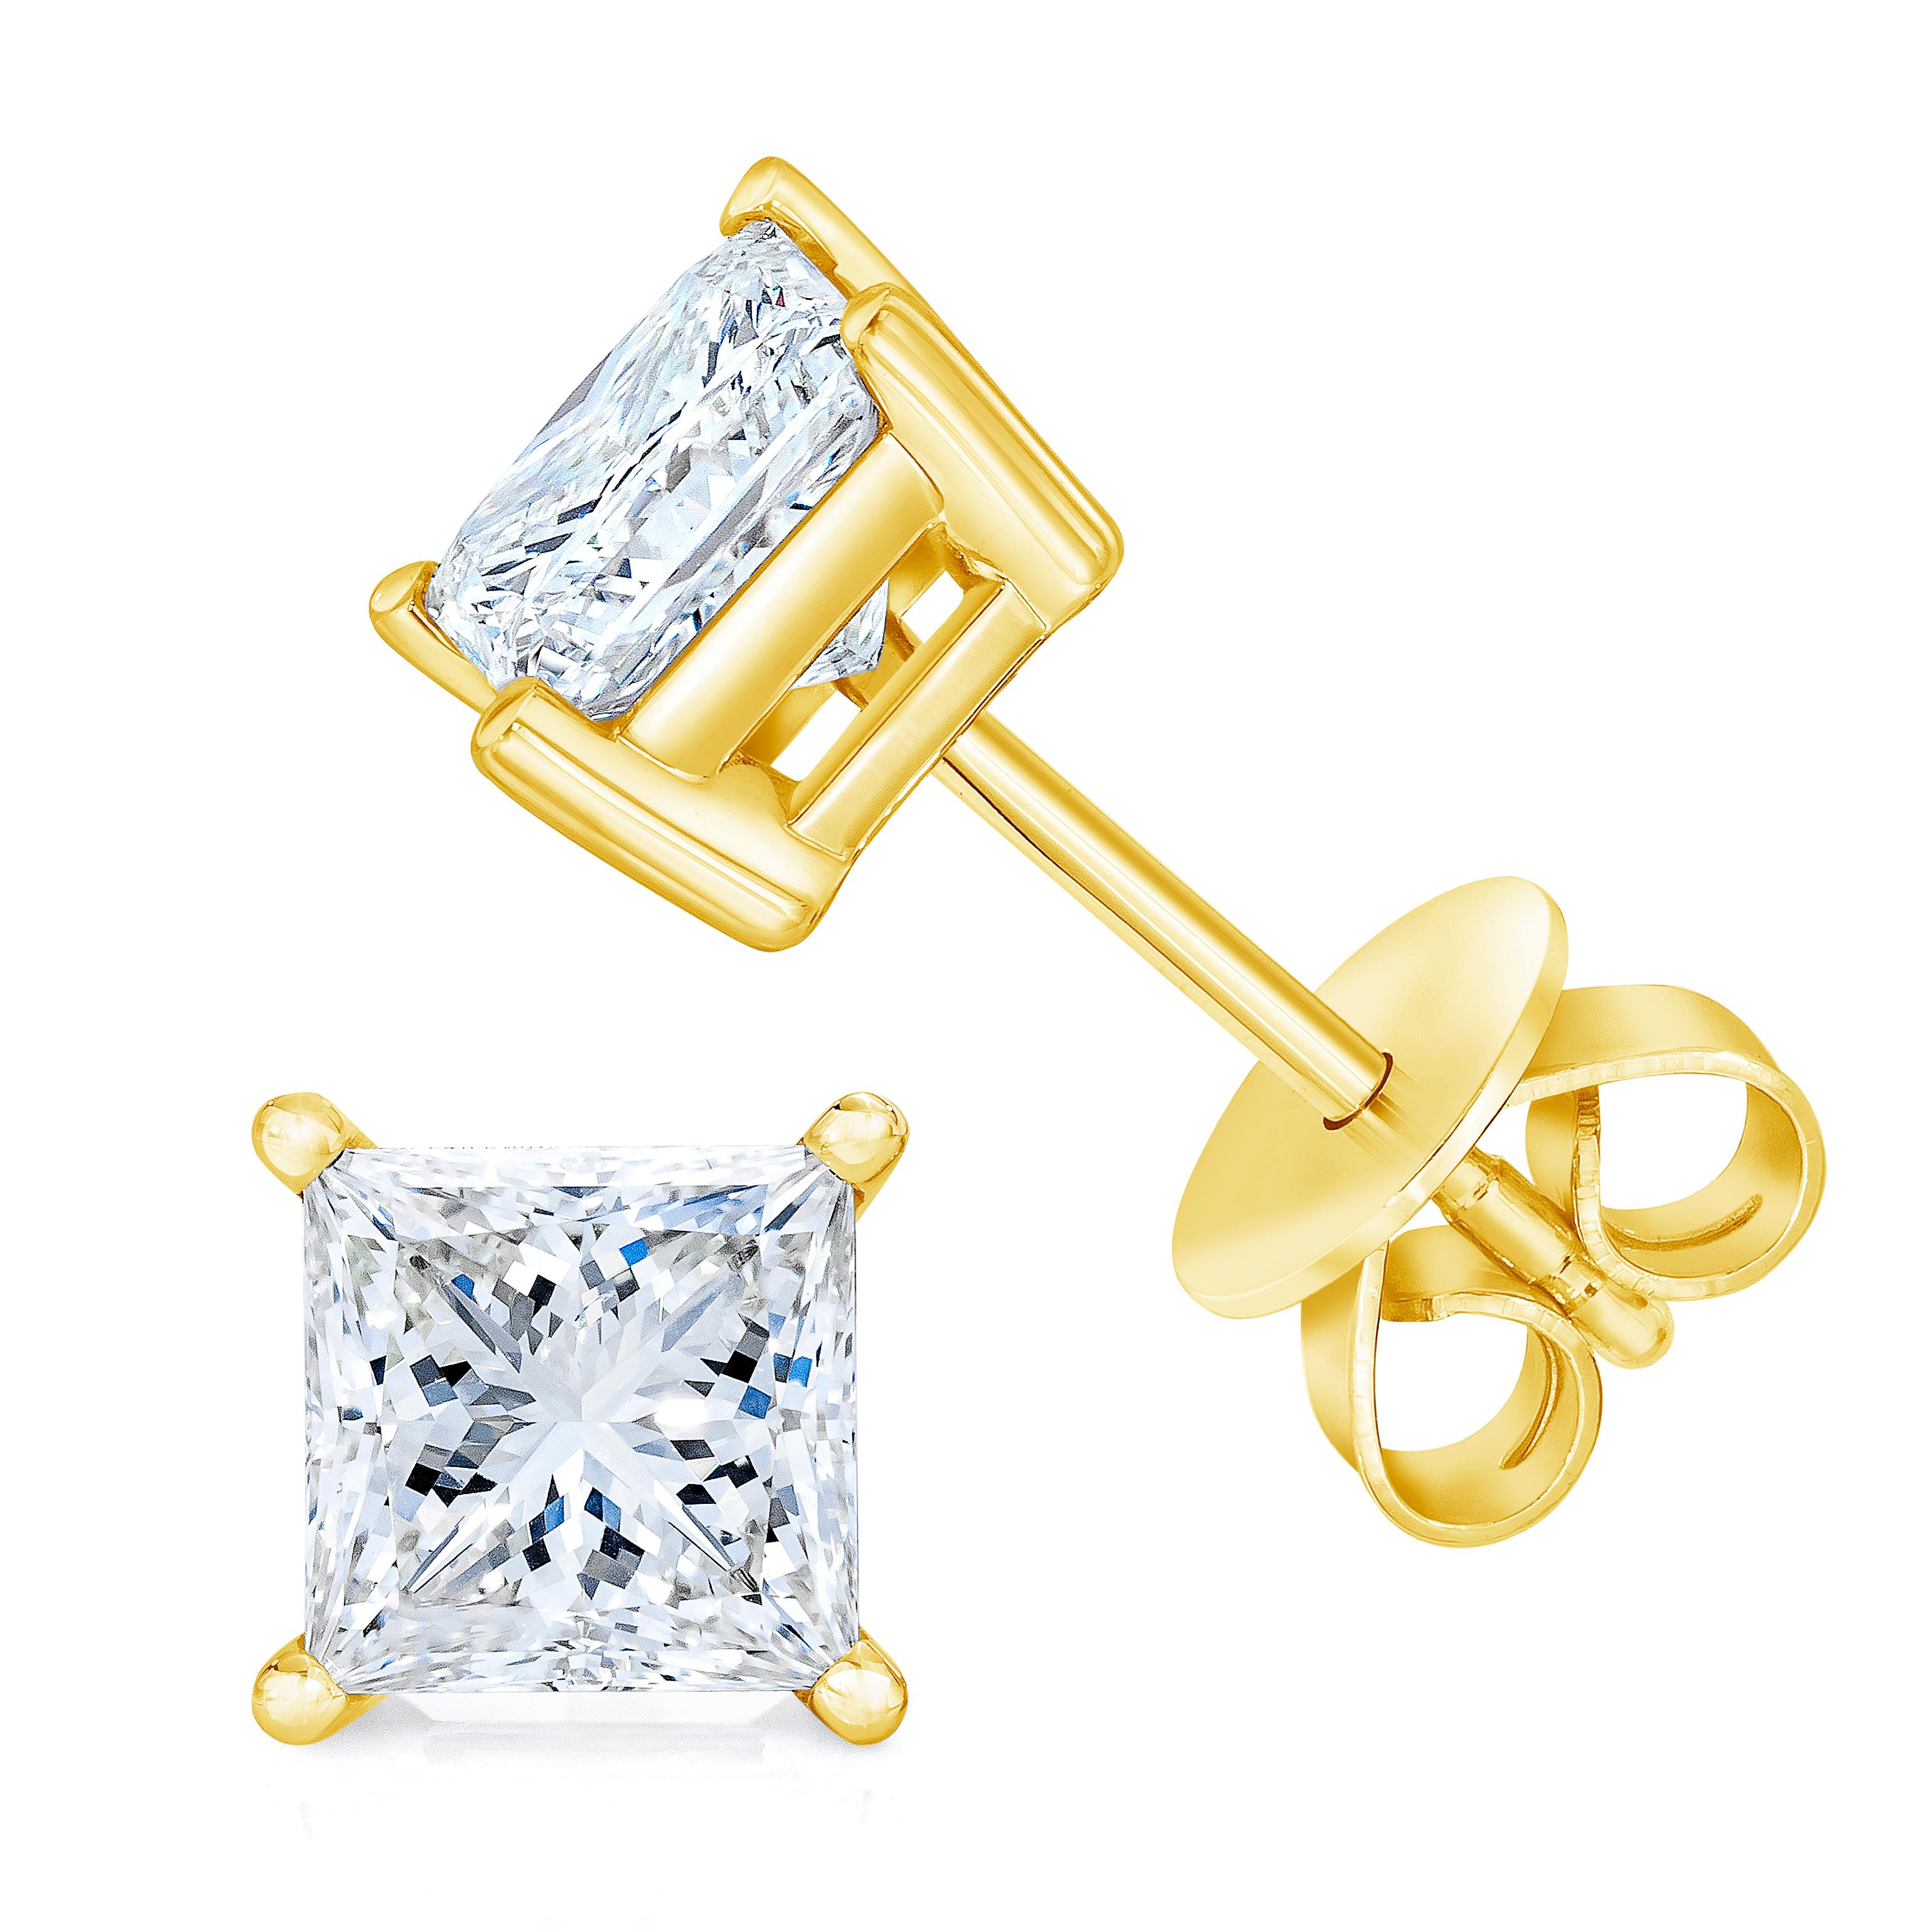 Celebrate any occasion with these classic shimmering diamond stud earrings. Crafted from 14k Yellow Gold each earring showcases a sparkling Princess-Cut Solitaire Diamond in a 4-Prong Setting. Dazzling with 1/4 cttw of diamonds and a bright polished